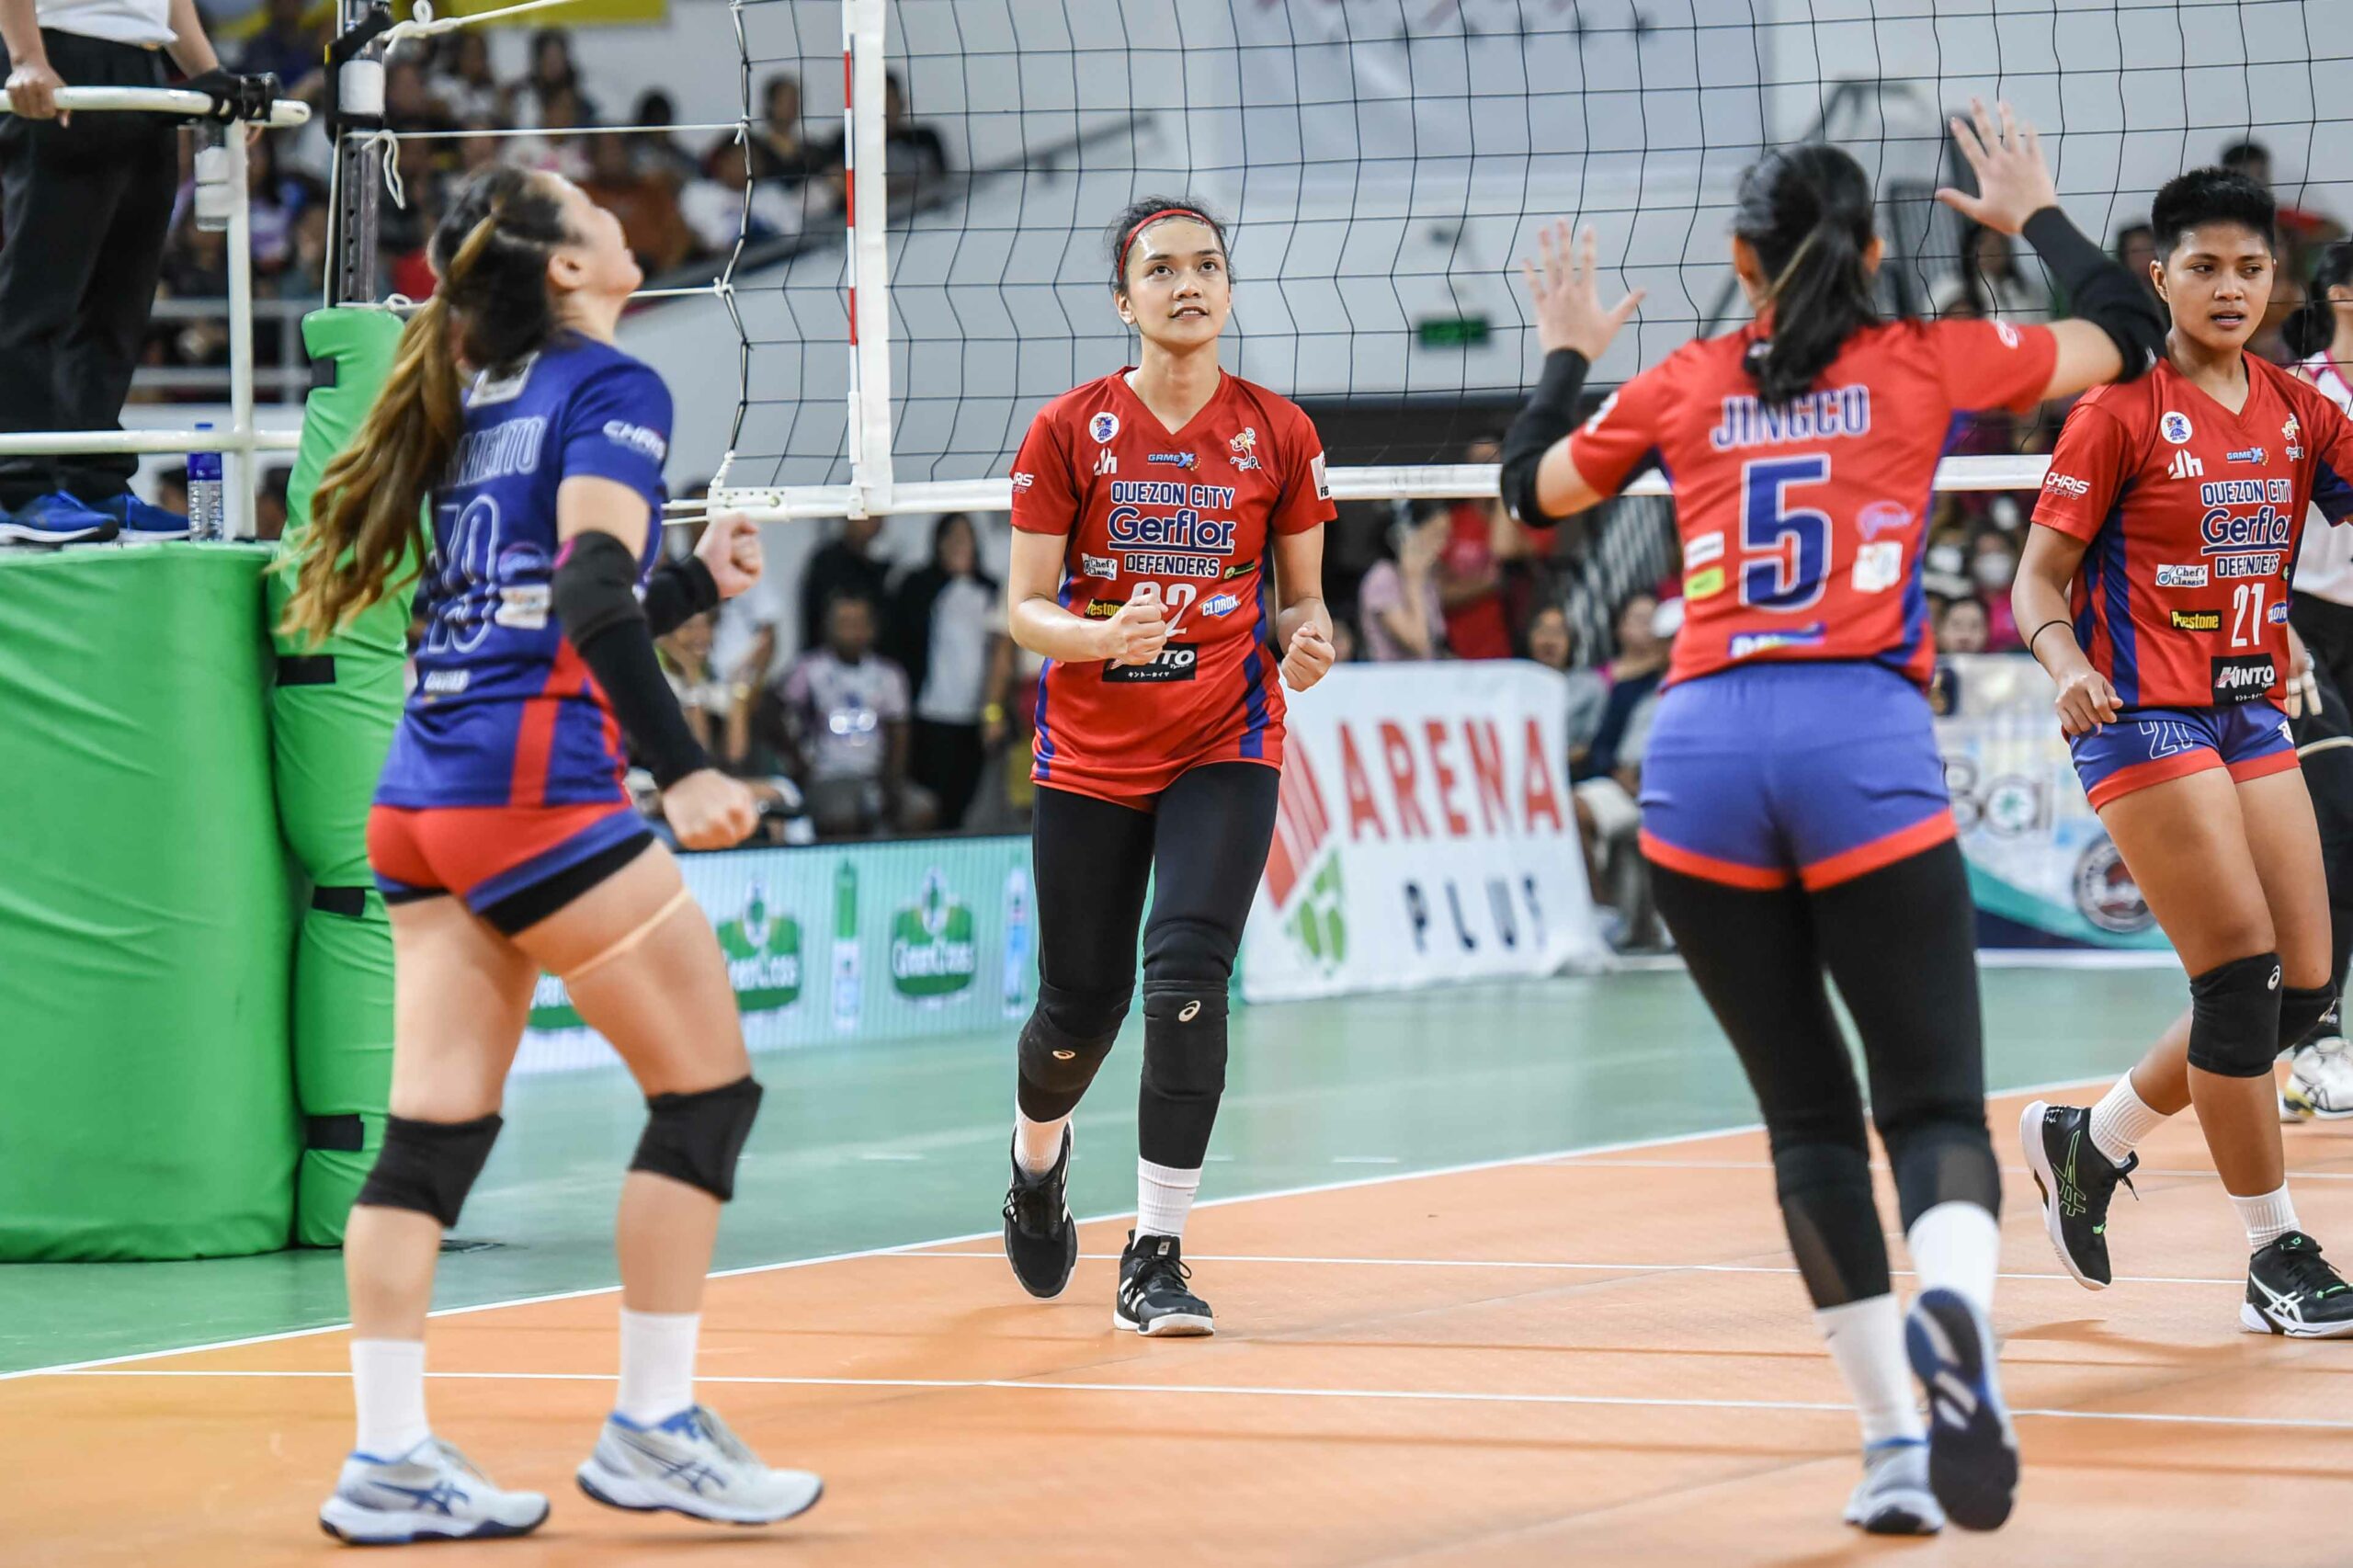 PVL-On-Tour-CDO-Akari-vs.-Gerflor-Shang-Berte-4370-scaled Sammy Acaylar relishes first PVL game in hometown of CDO News PVL Volleyball  - philippine sports news